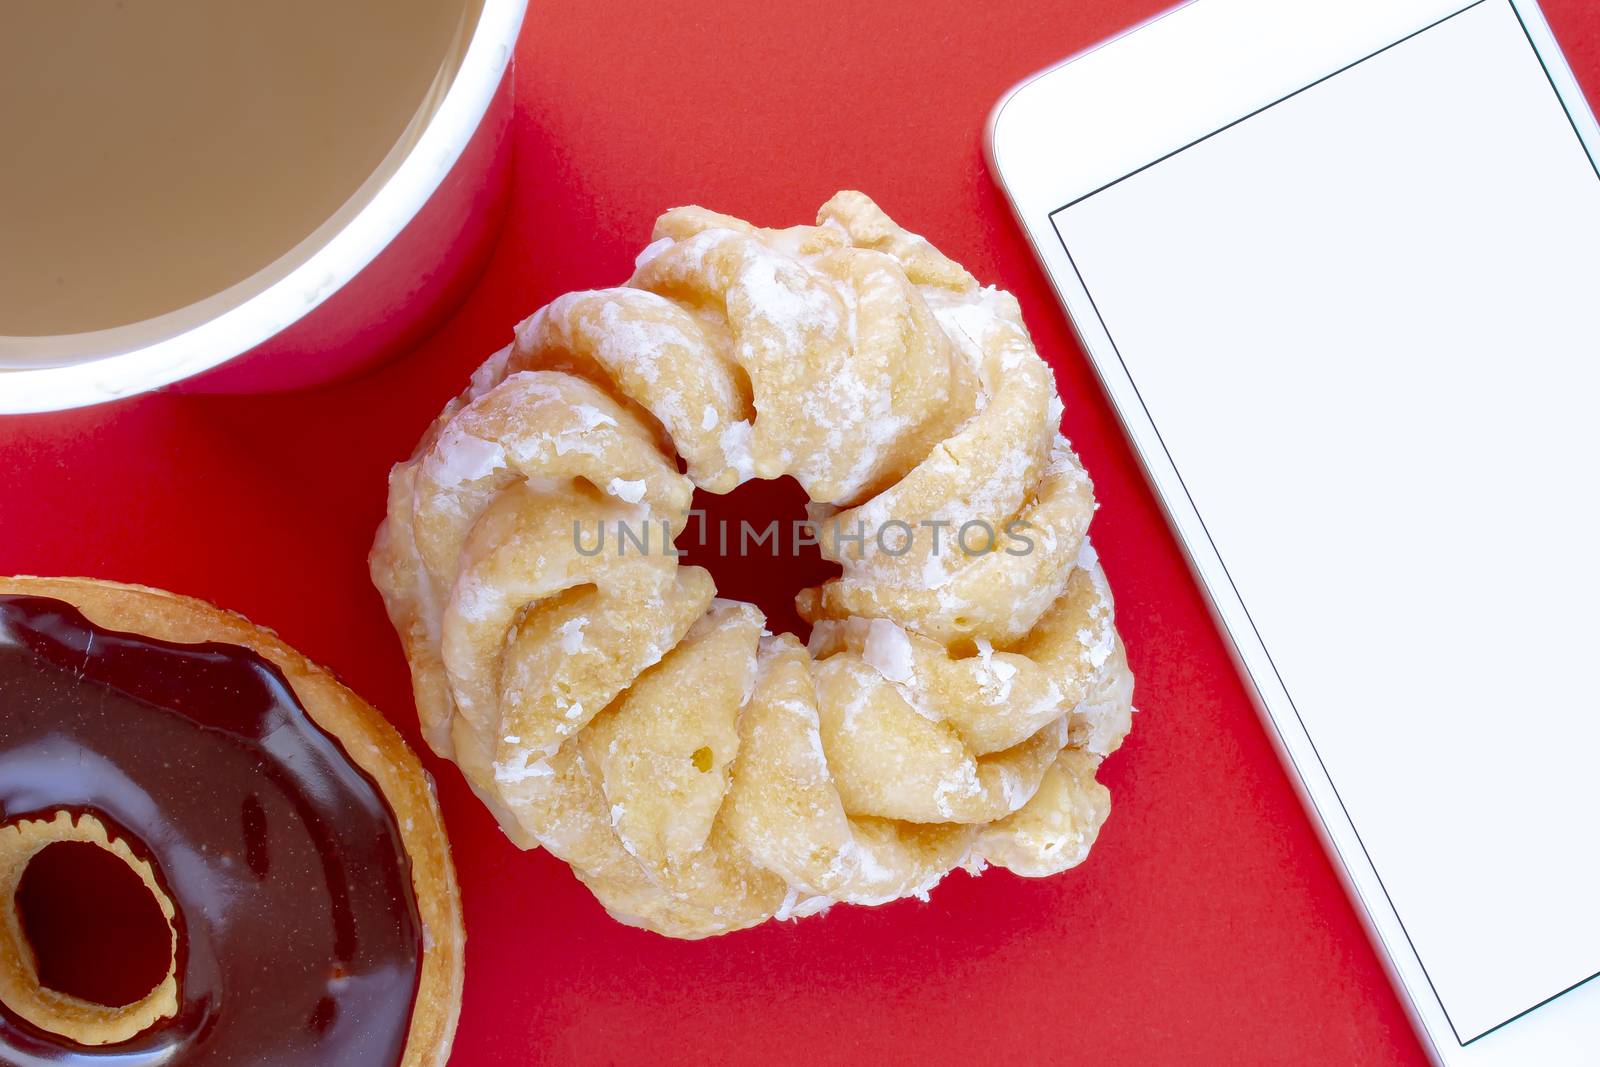 A cup of coffee with a Chocolate Dip Donut and Honey Cruller Donut with a smartphone by oasisamuel